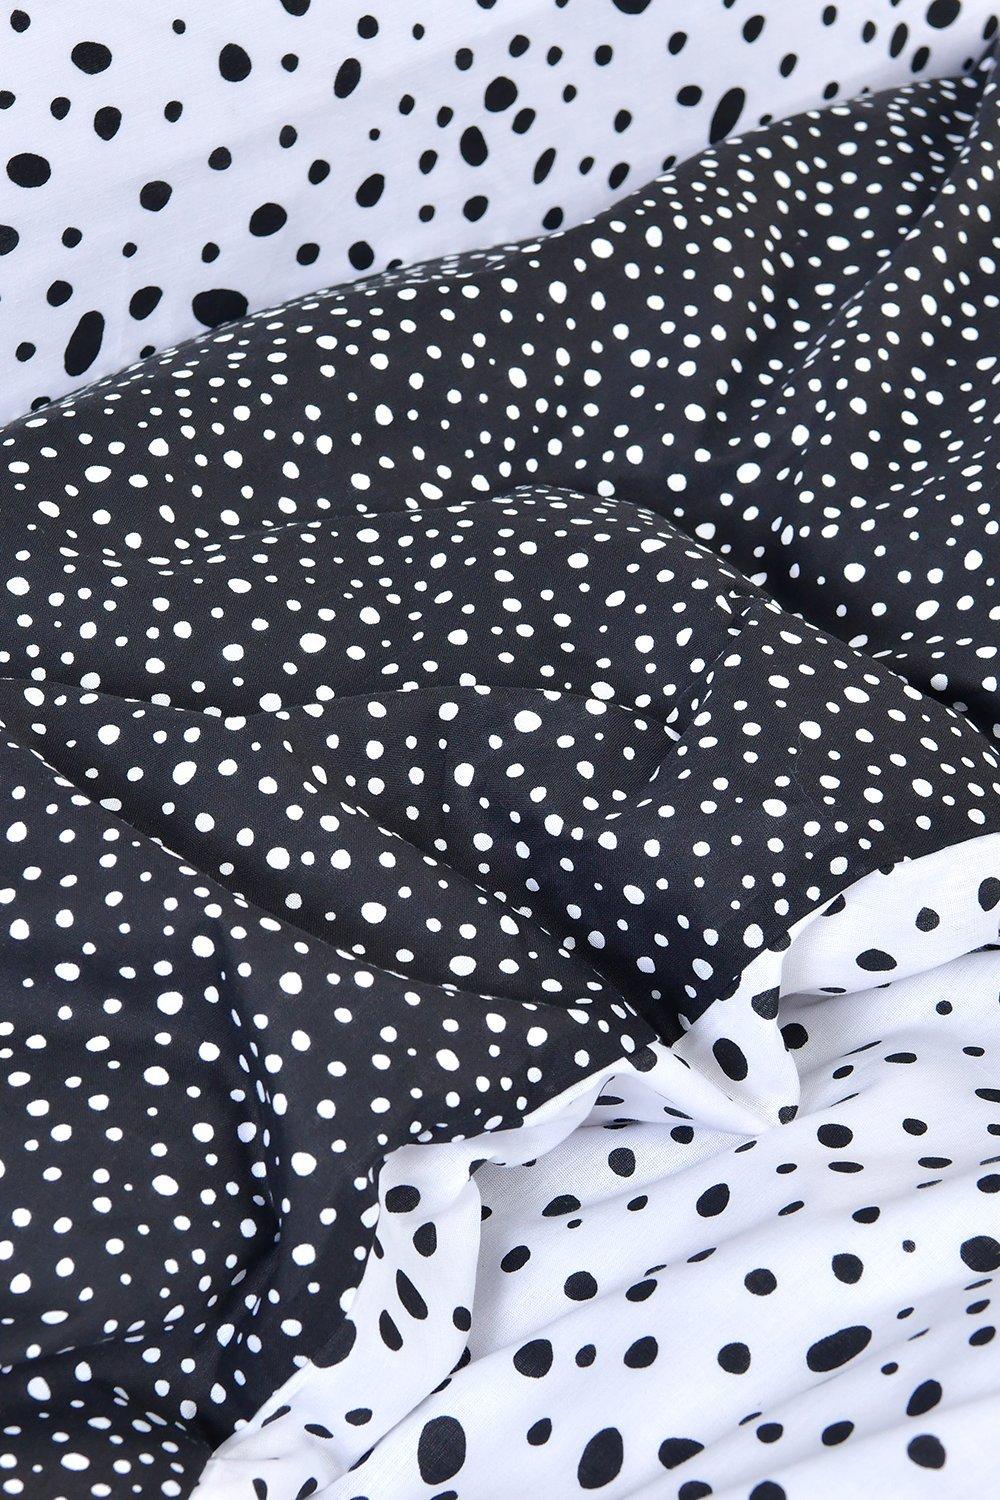 PIUMINO DOUBLE FACE A POIS DONNA NERO - Step By Step